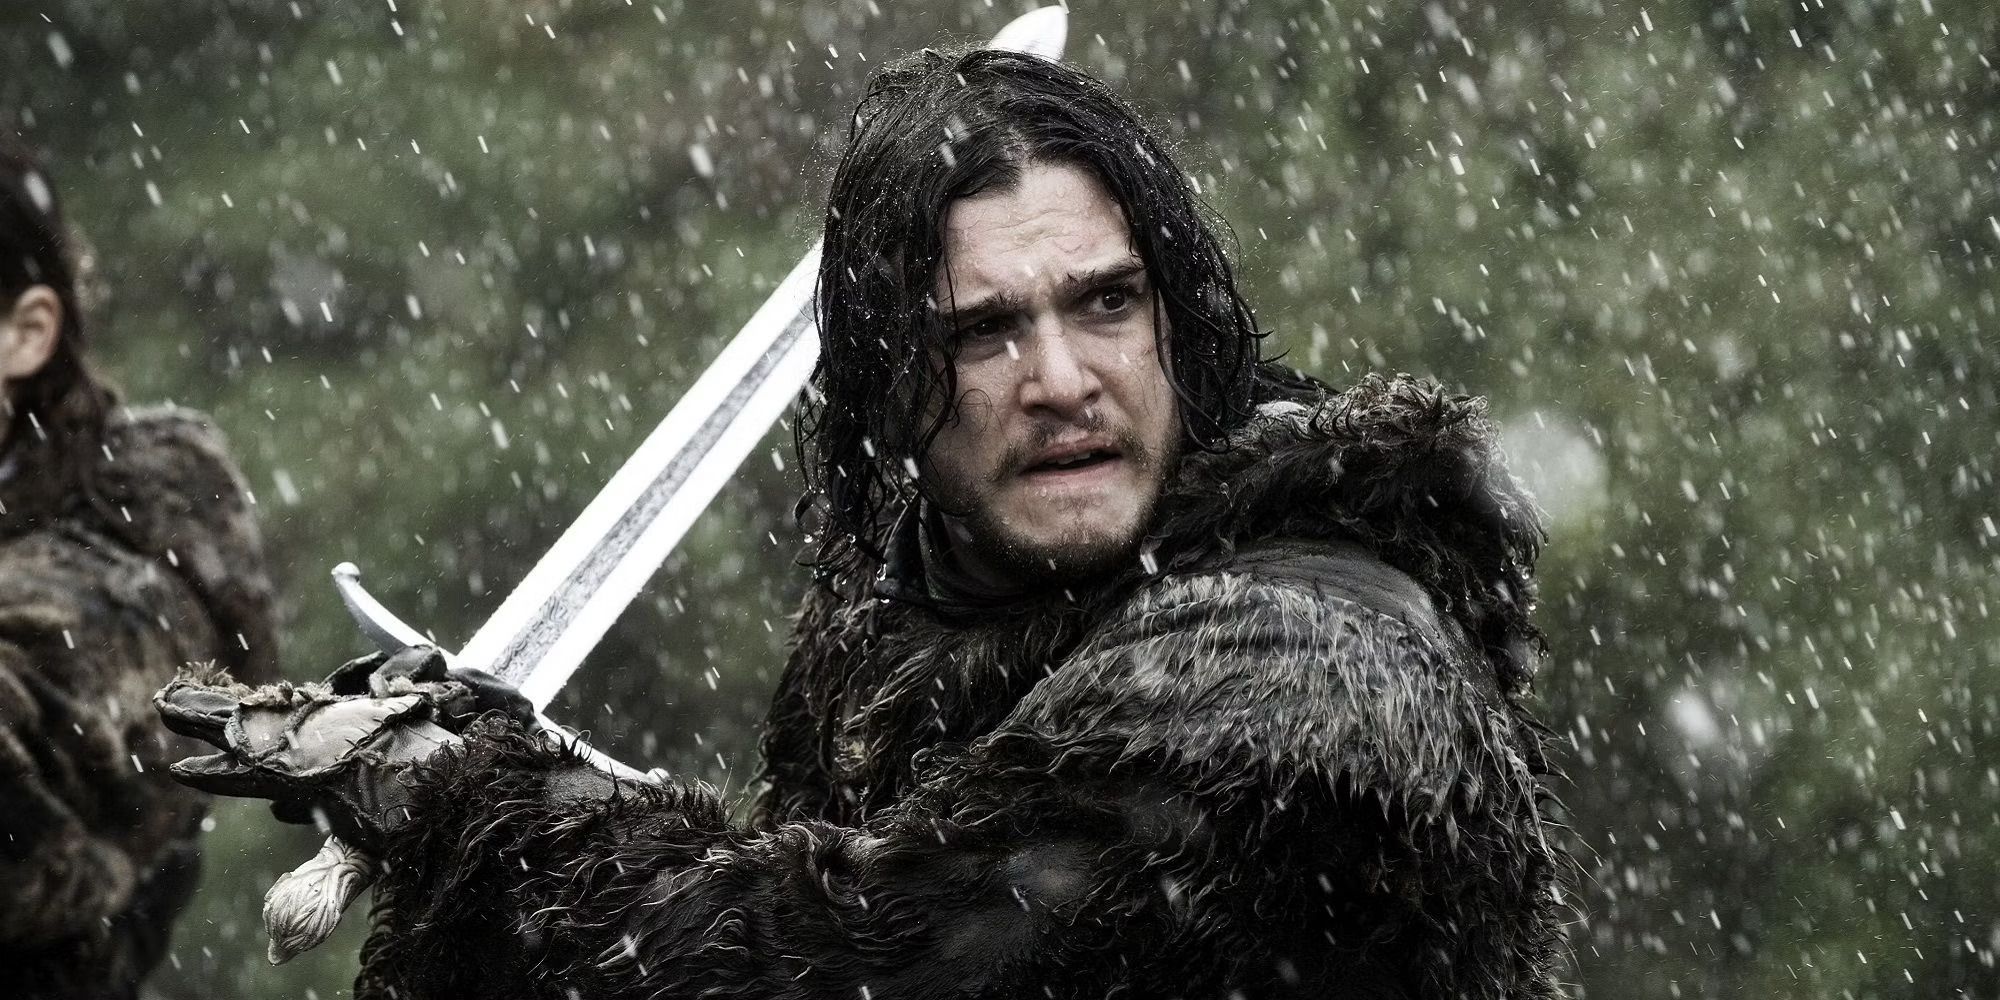 Jon Snow holding his sword Longclaw in 'Game of Thrones'